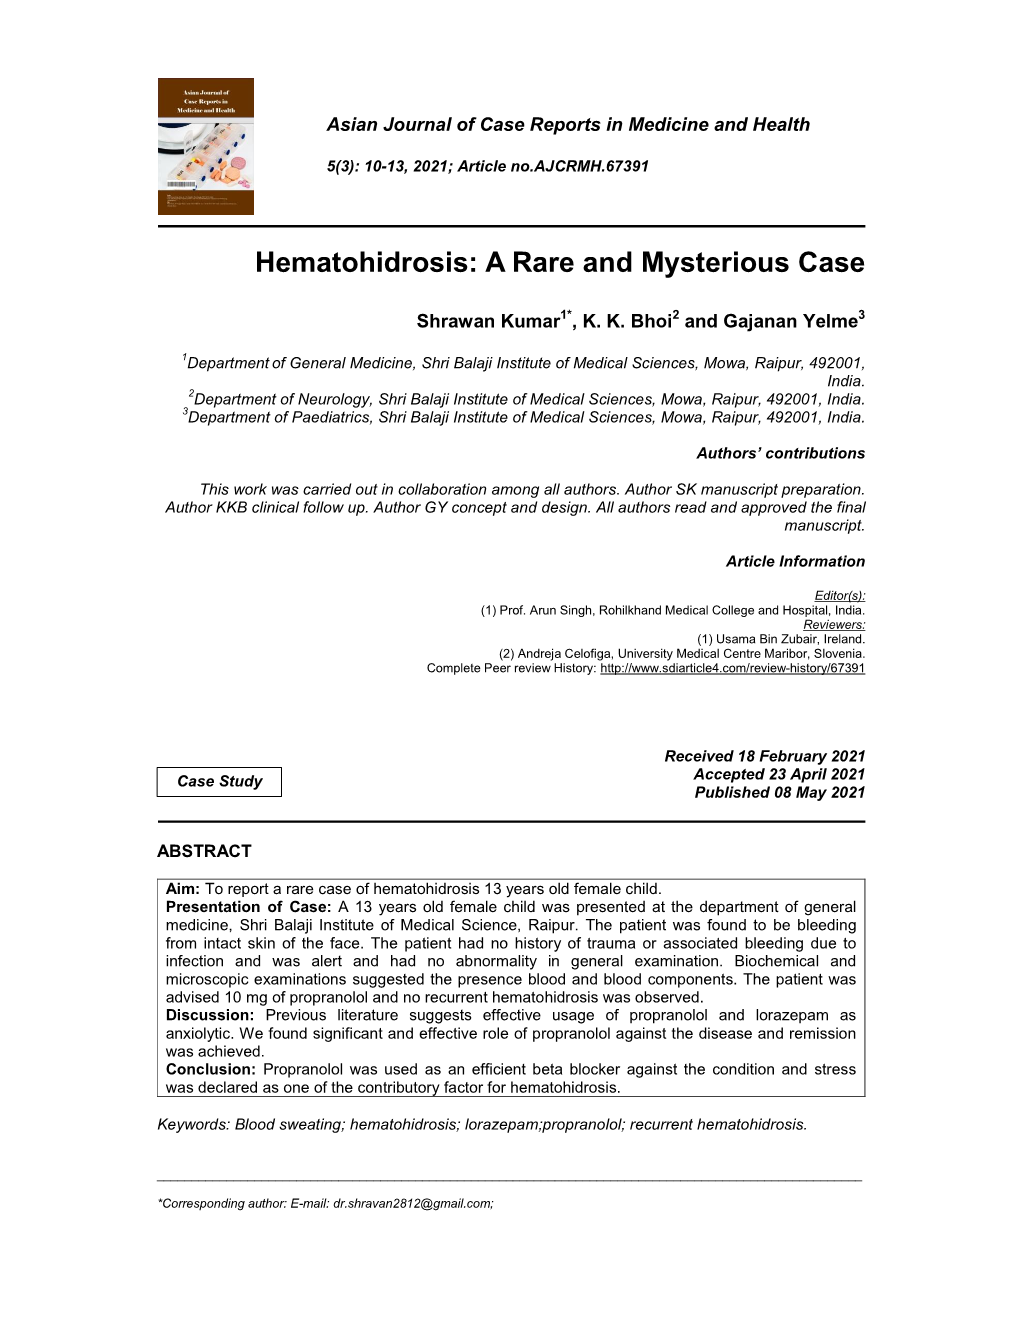 Hematohidrosis: a Rare and Mysterious Case